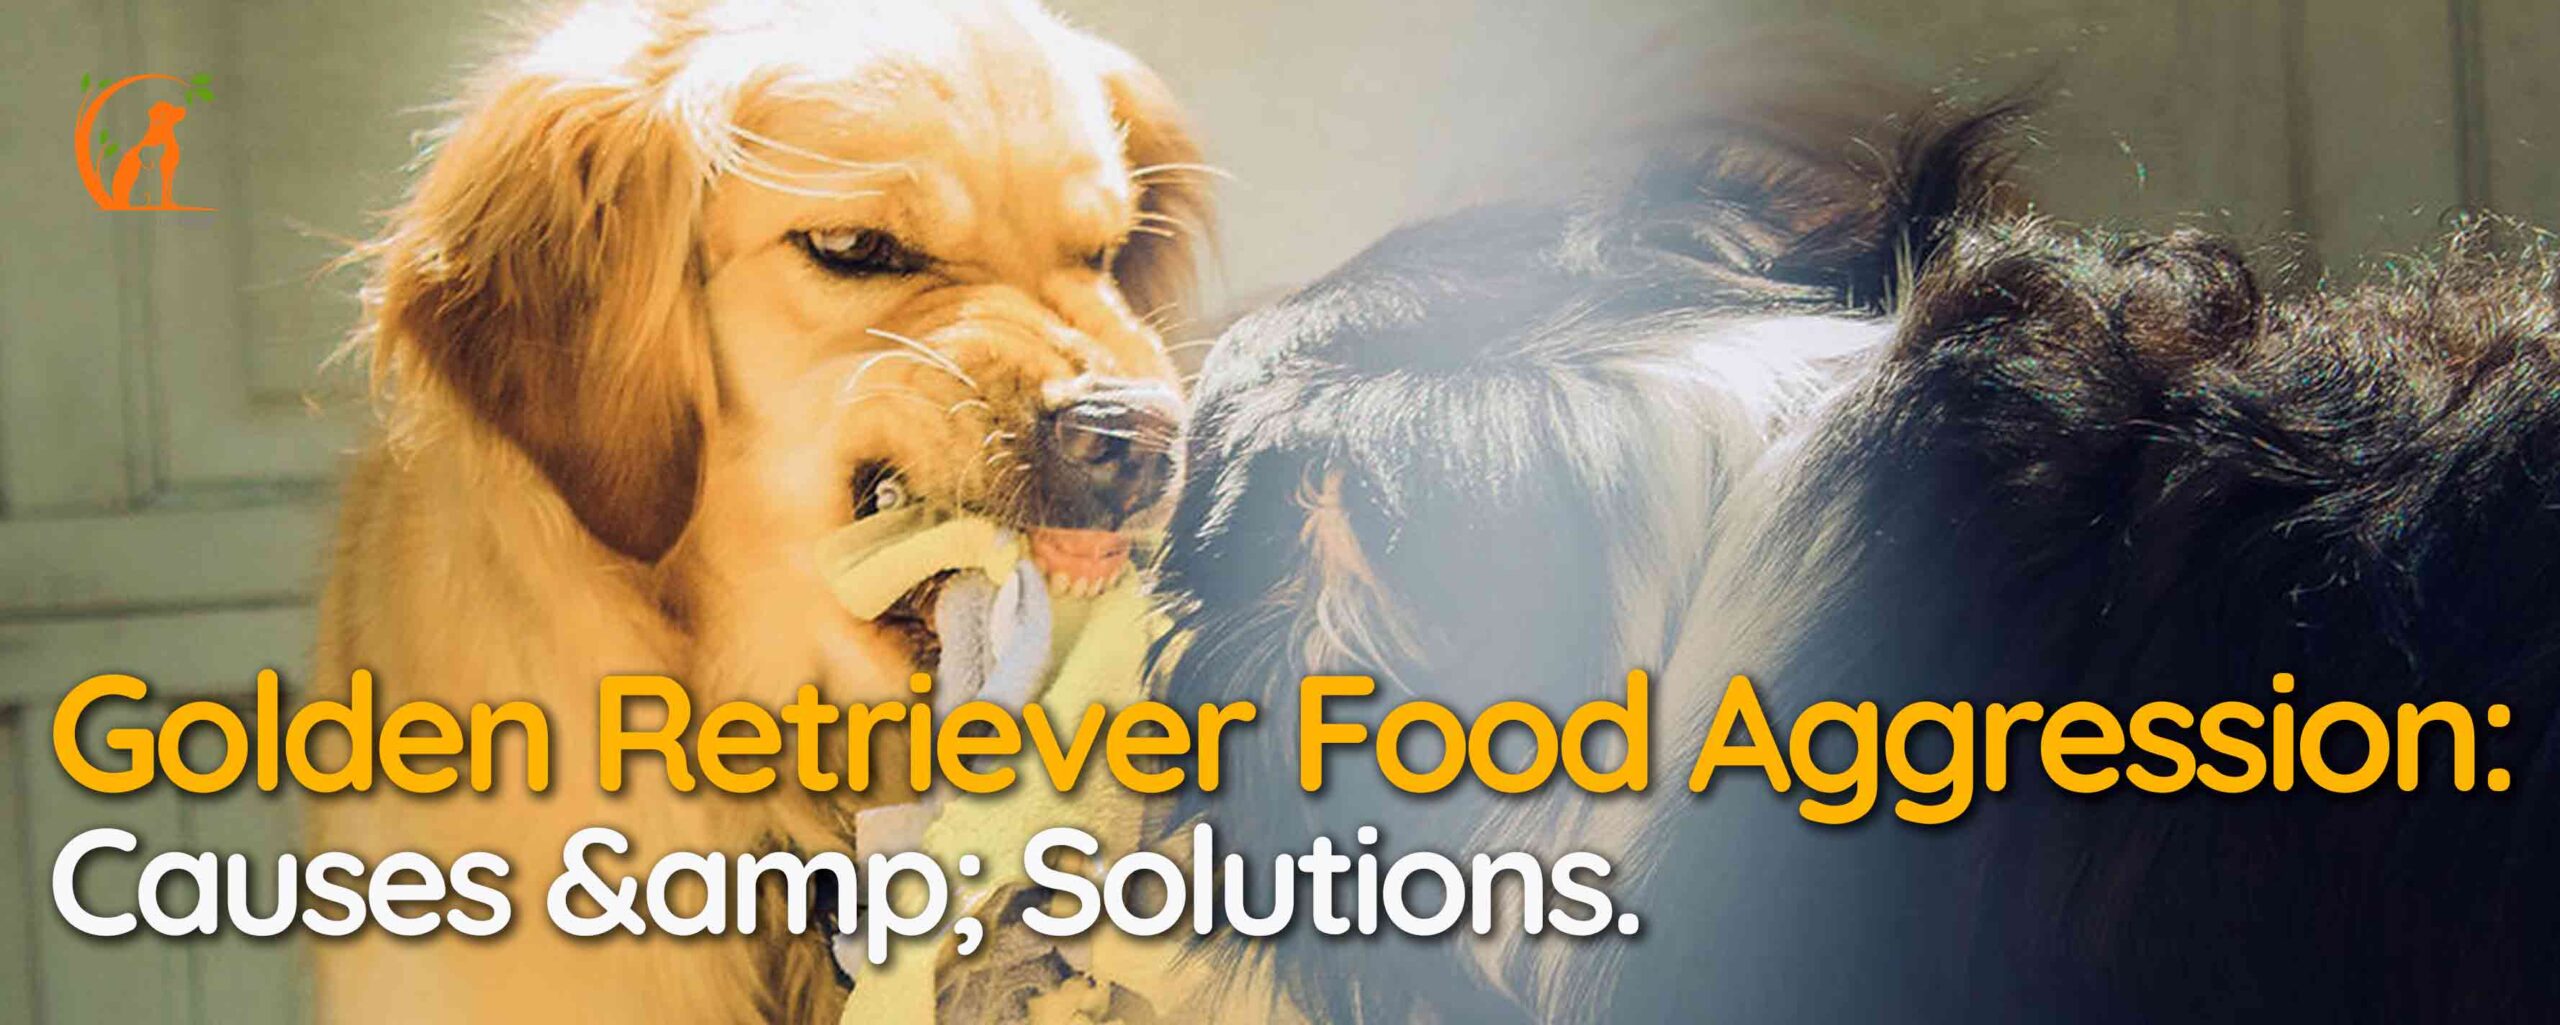 Golden Retriever Food Aggression: Causes & Solutions.